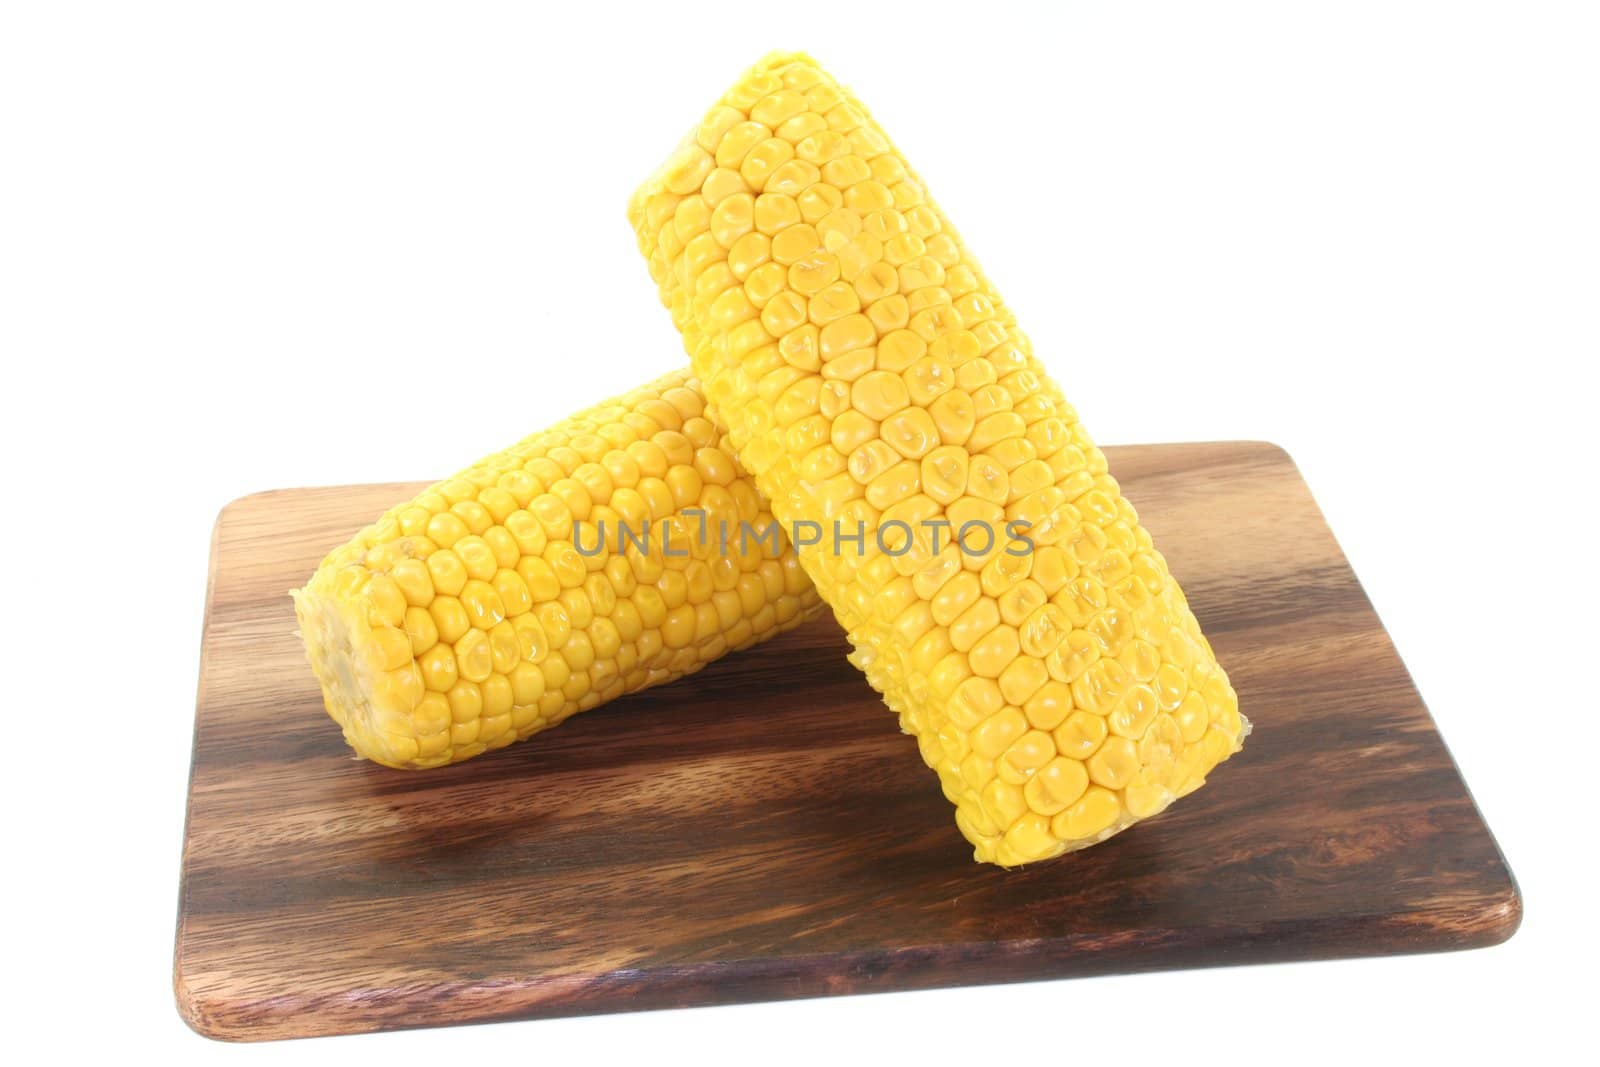 Corncob by discovery